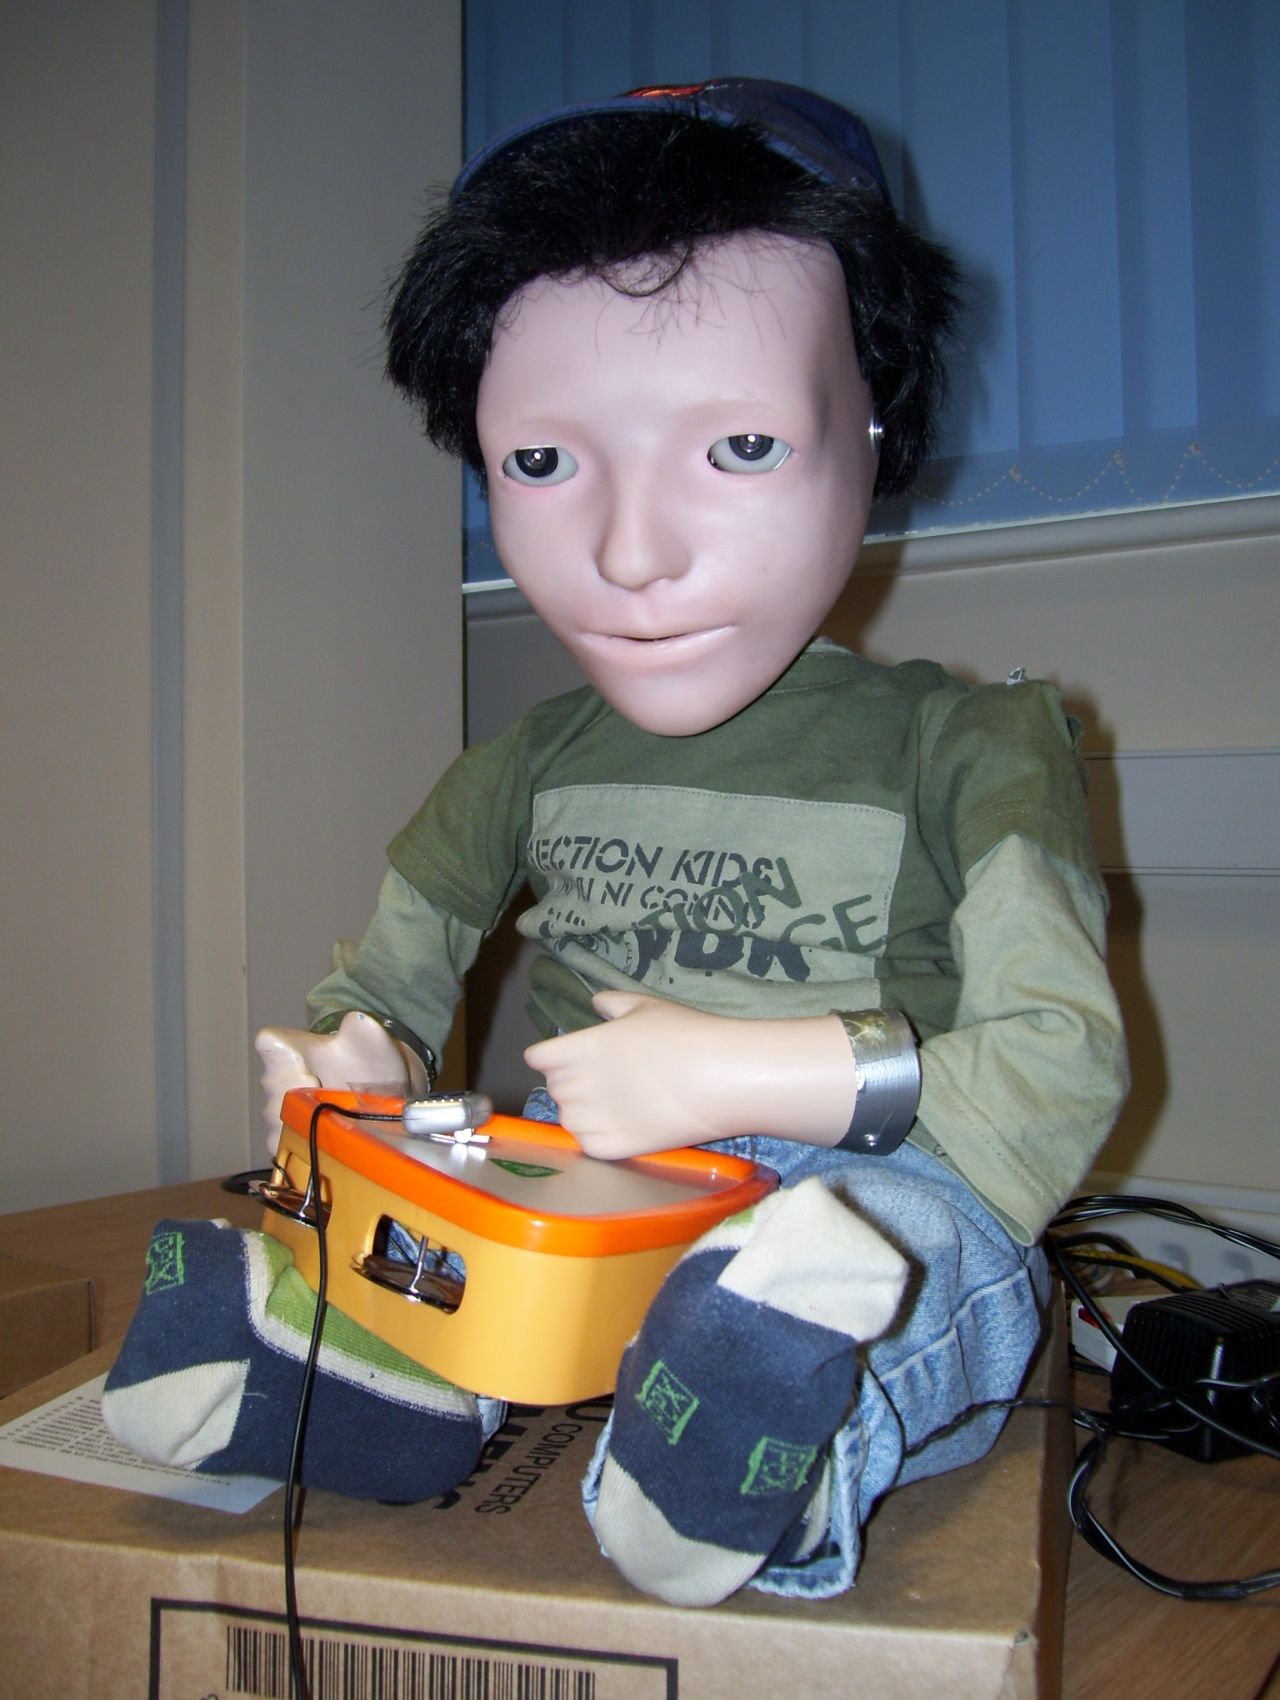 Also being used to help autistic children, KASPAR was created at the UK's University of Hertfordshire. Its face is a silicon-rubber mask and its eyes are fitted with video cameras. Its mouth can open and smile.